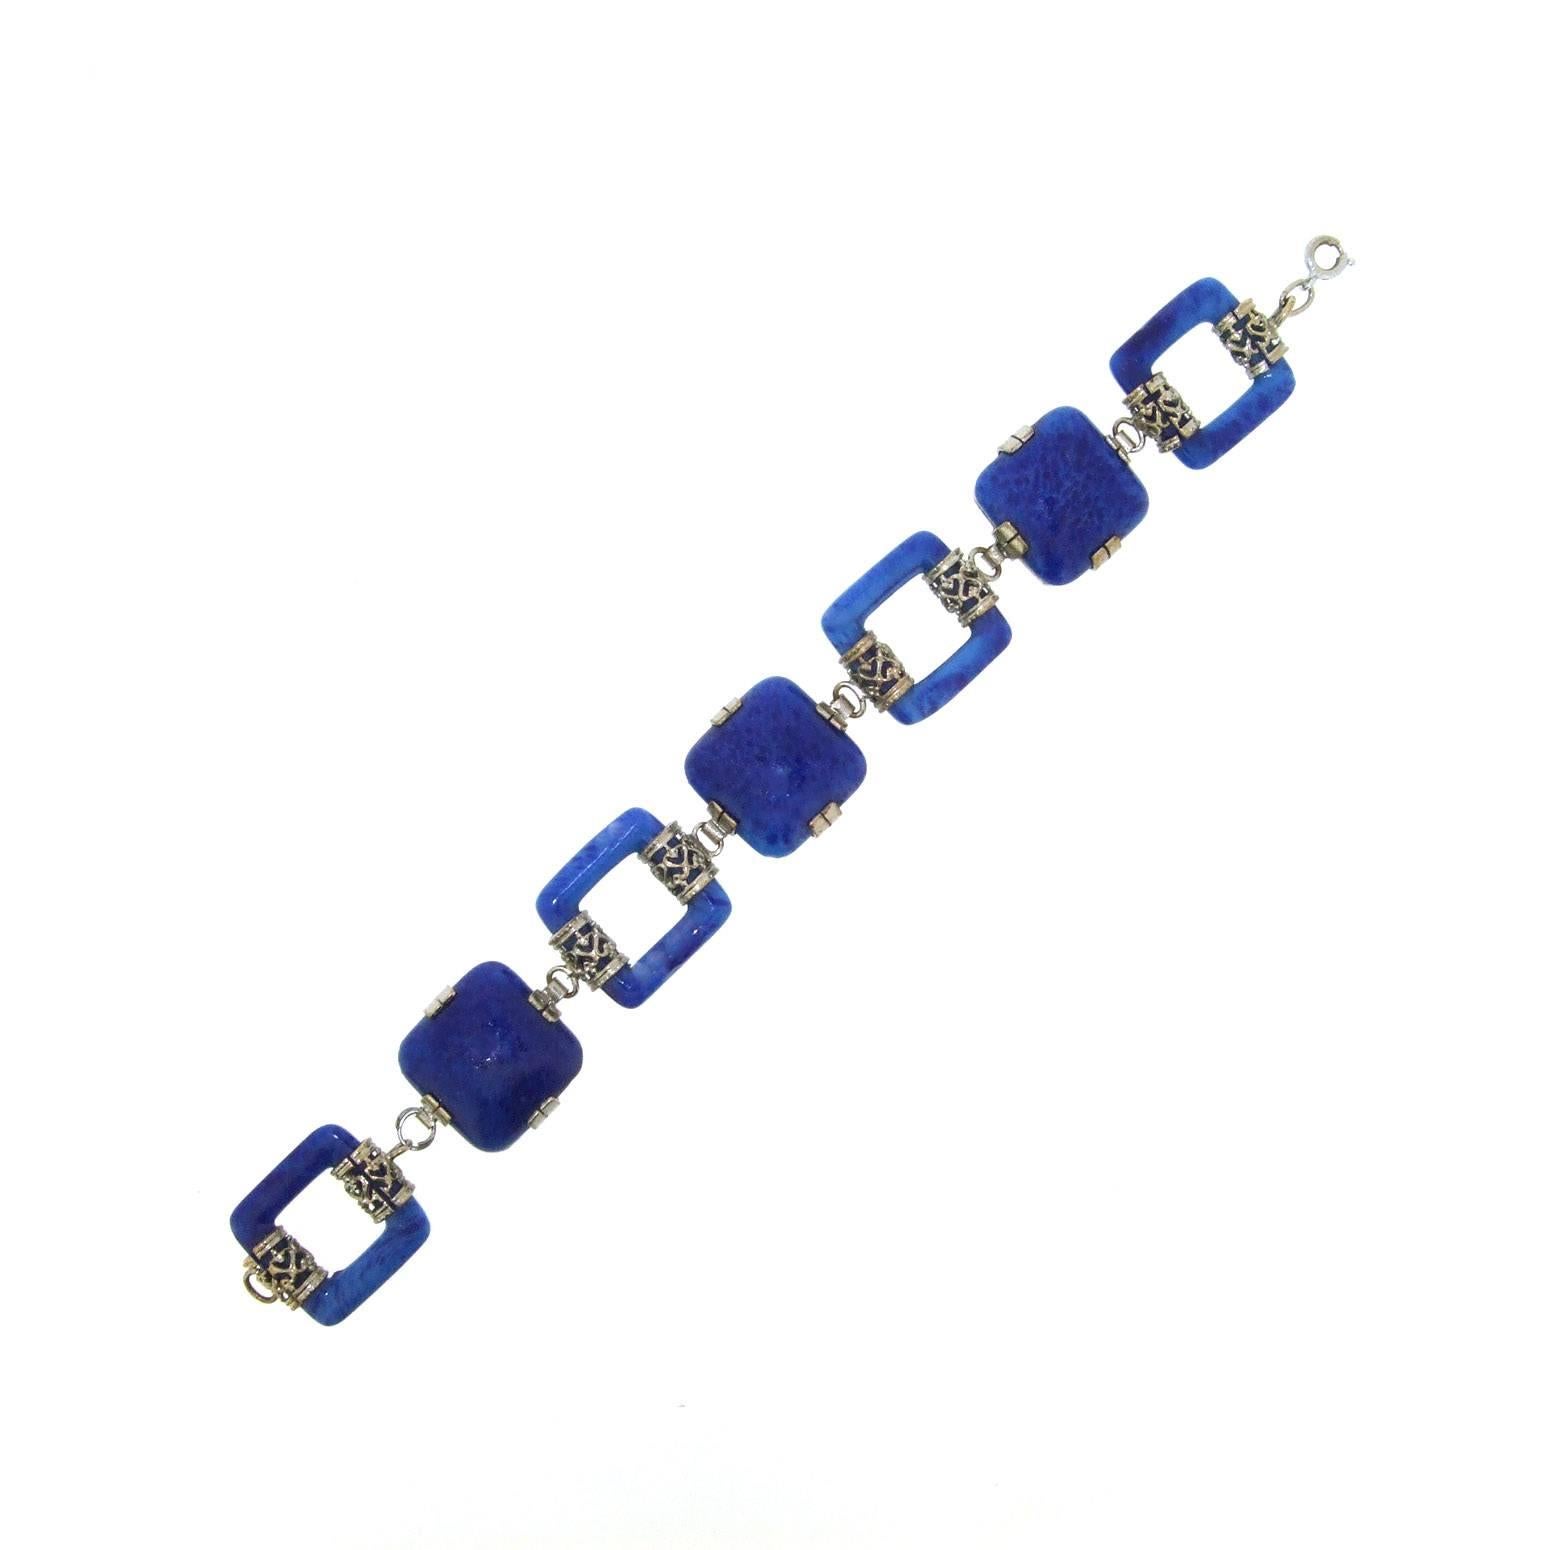 A stunning lapis effect blue Czechoslovakian glass Art Deco bracelet. This glass is sometimes known as 'swiss lapis' with its lapis emulation. 

The squares measure 2cm wide by 1.8cm, the bracelet measures 7 1/2 inches/ 19.2cm long, by 1.8cm wide,